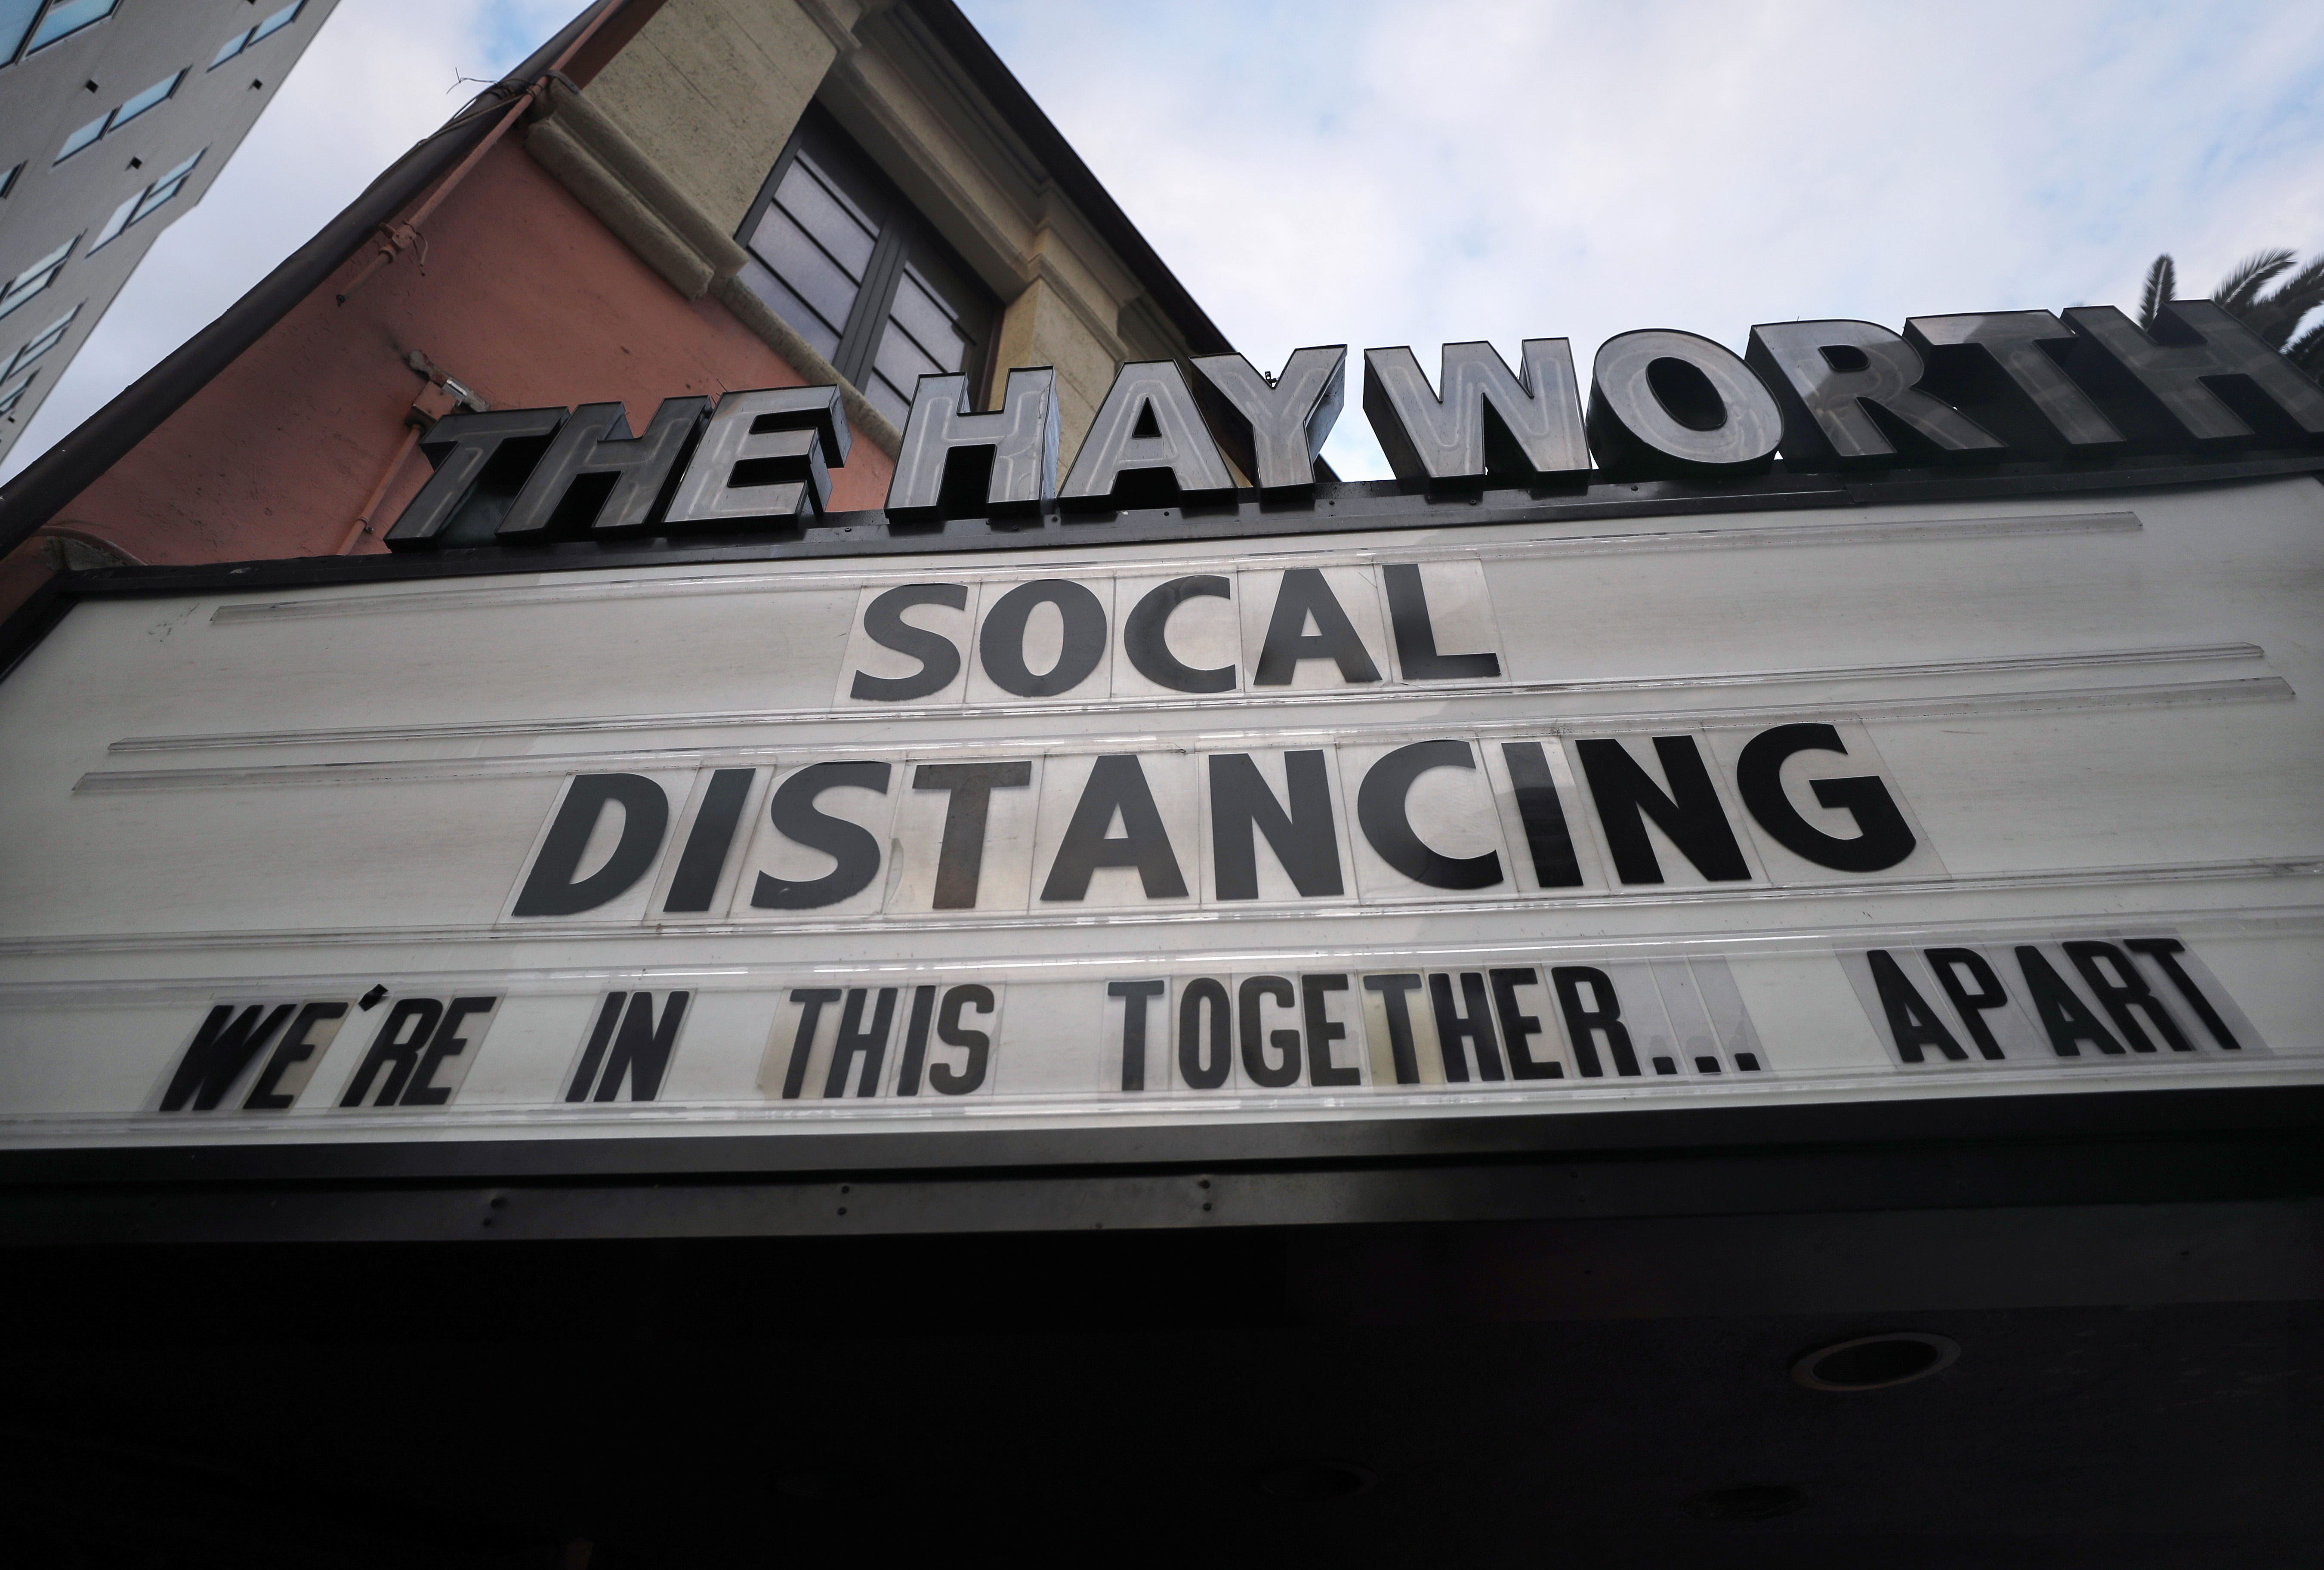 The shuttered Hayworth Theatre in Los Angeles displays the message 'Social Distancing We're In This Together...Apart' on the marquee, as the coronavirus pandemic continues, on March 23, 2020.